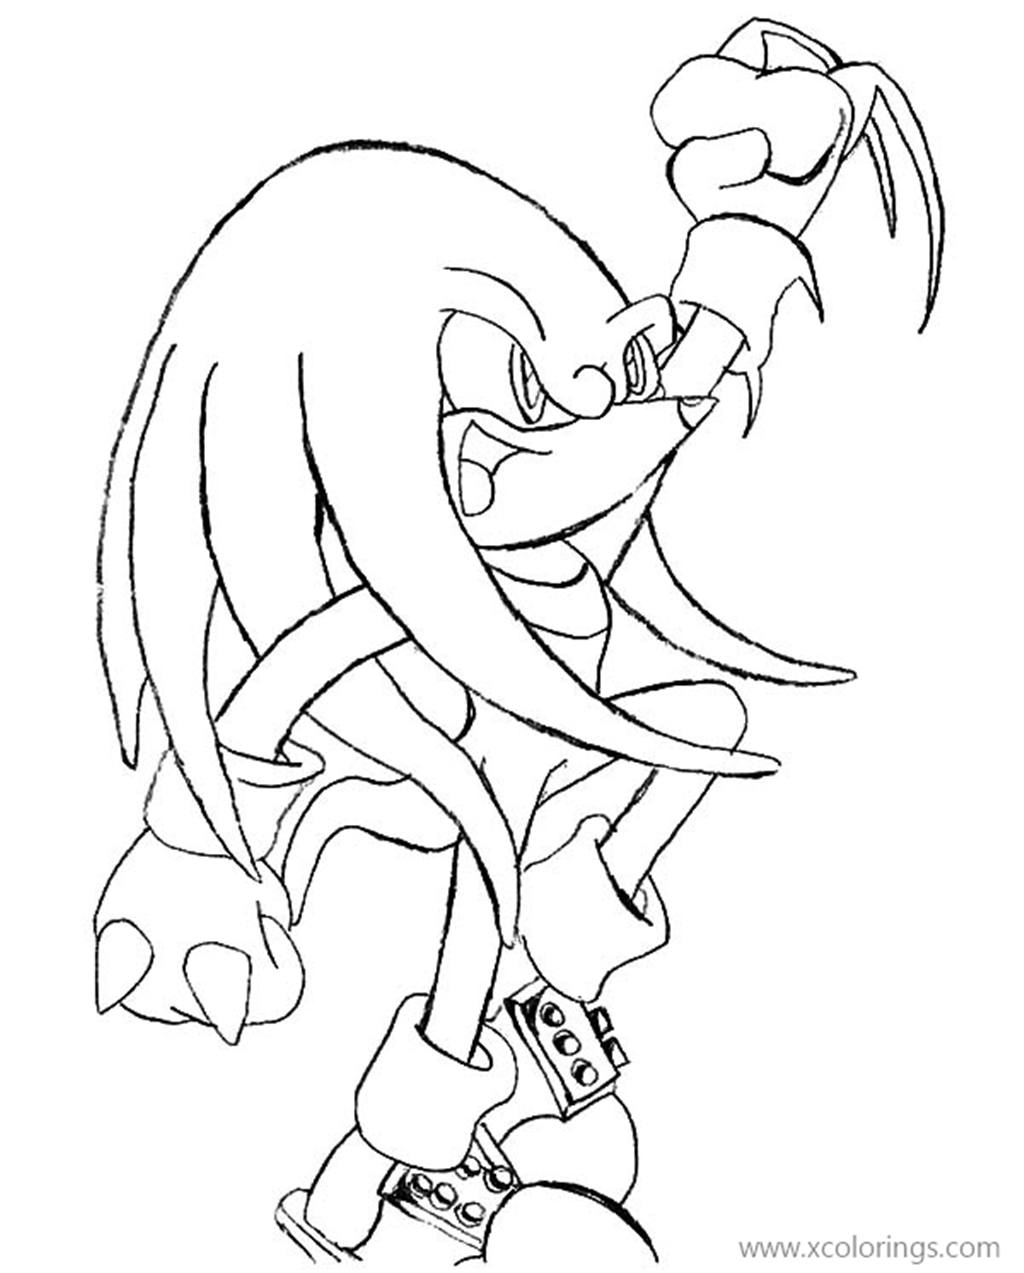 Free Knuckles Cheering Coloring Pages printable